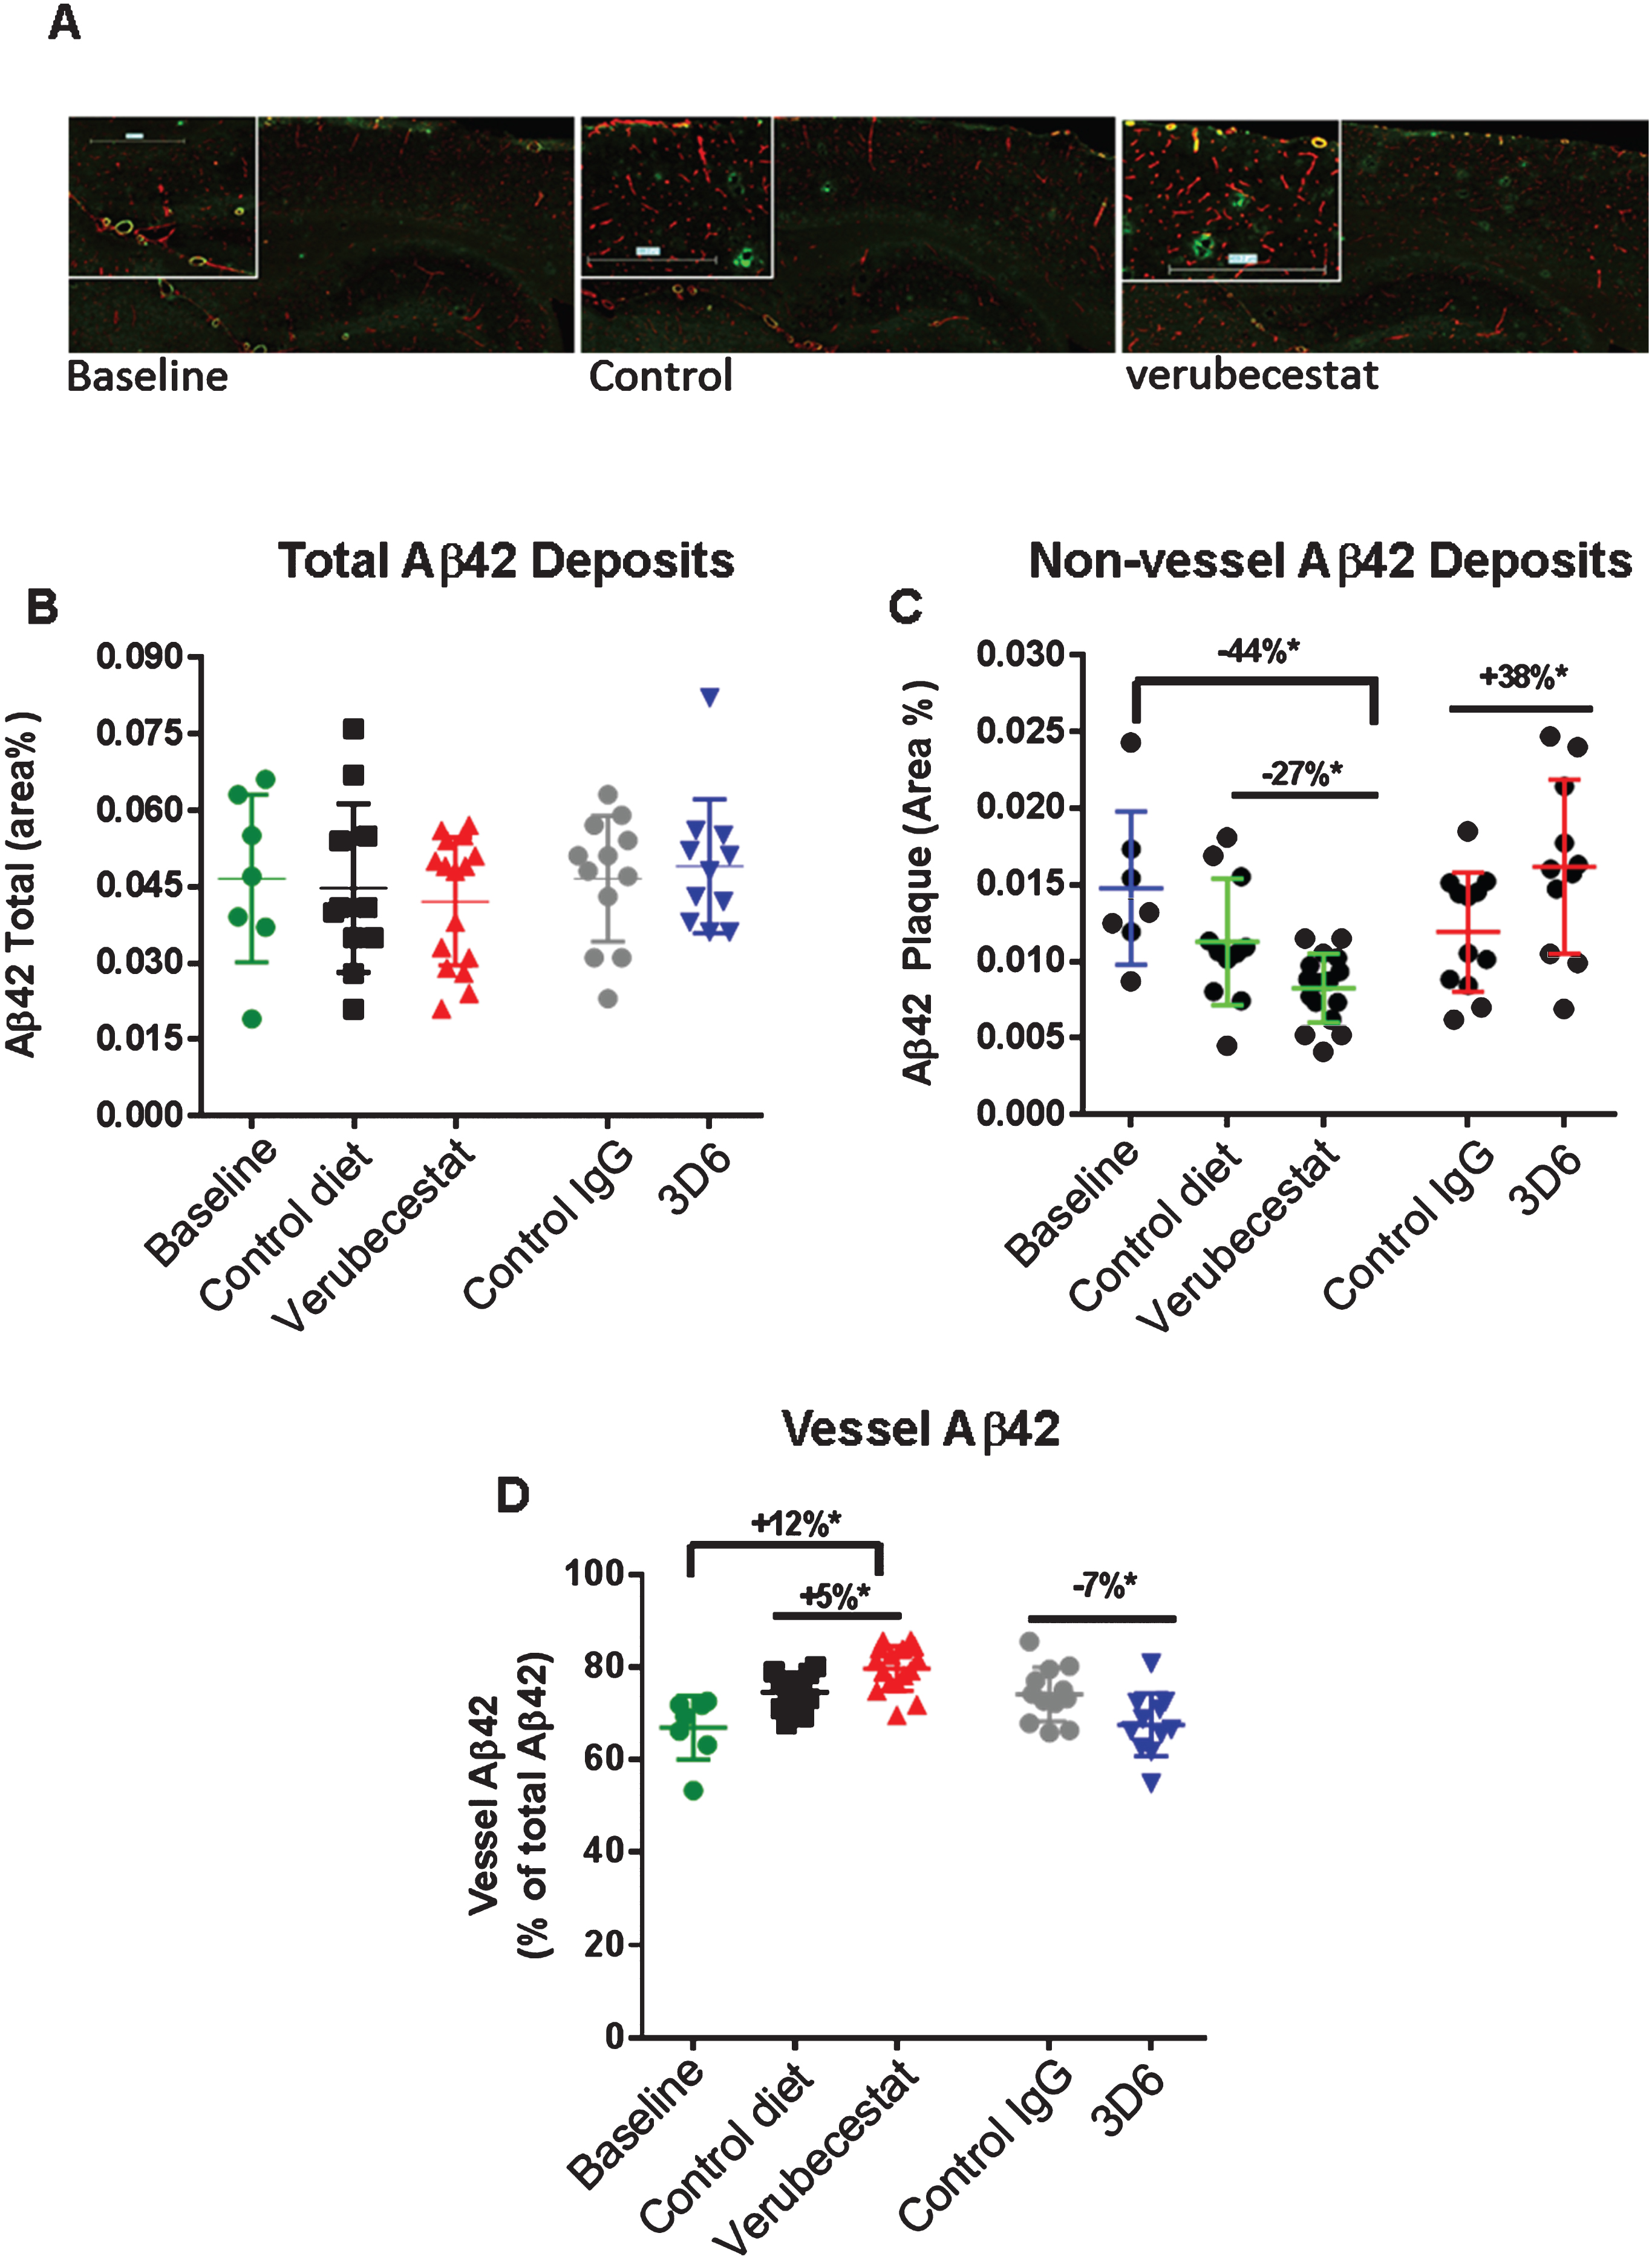 Analysis of total, non-vessel and vessel-associated Aβ42 deposits. A) Representative images from a baseline (left), control (vehicle) diet-treated (middle), and verubecestat-treated mouse stained with the C-terminal specific anti-Aβ42 antibody, G2-11 (green) and with an anti-collagen IV antibody to label all blood vessels (red). Scale bar = 500 microns. Magnified insets are to allow for closer inspection of staining profiles. B) Fractional area of total Aβ42-immunoreactive deposits. C) Fractional area of non-vessel Aβ42-immunoreactive deposits determined by subtraction of the area of Aβ42 staining co-localized with collagen IV positive pixels (defined as vessel-associated Aβ42) from the total area of Aβ42-reactivity. D) Fraction of the total Aβ42 deposits associated with vessels. Aβ42 reactive areas were normalized to the area of the total region analyzed. *p < 0.05 (two-tailed t-tests, pairwise). Data are means±sd.